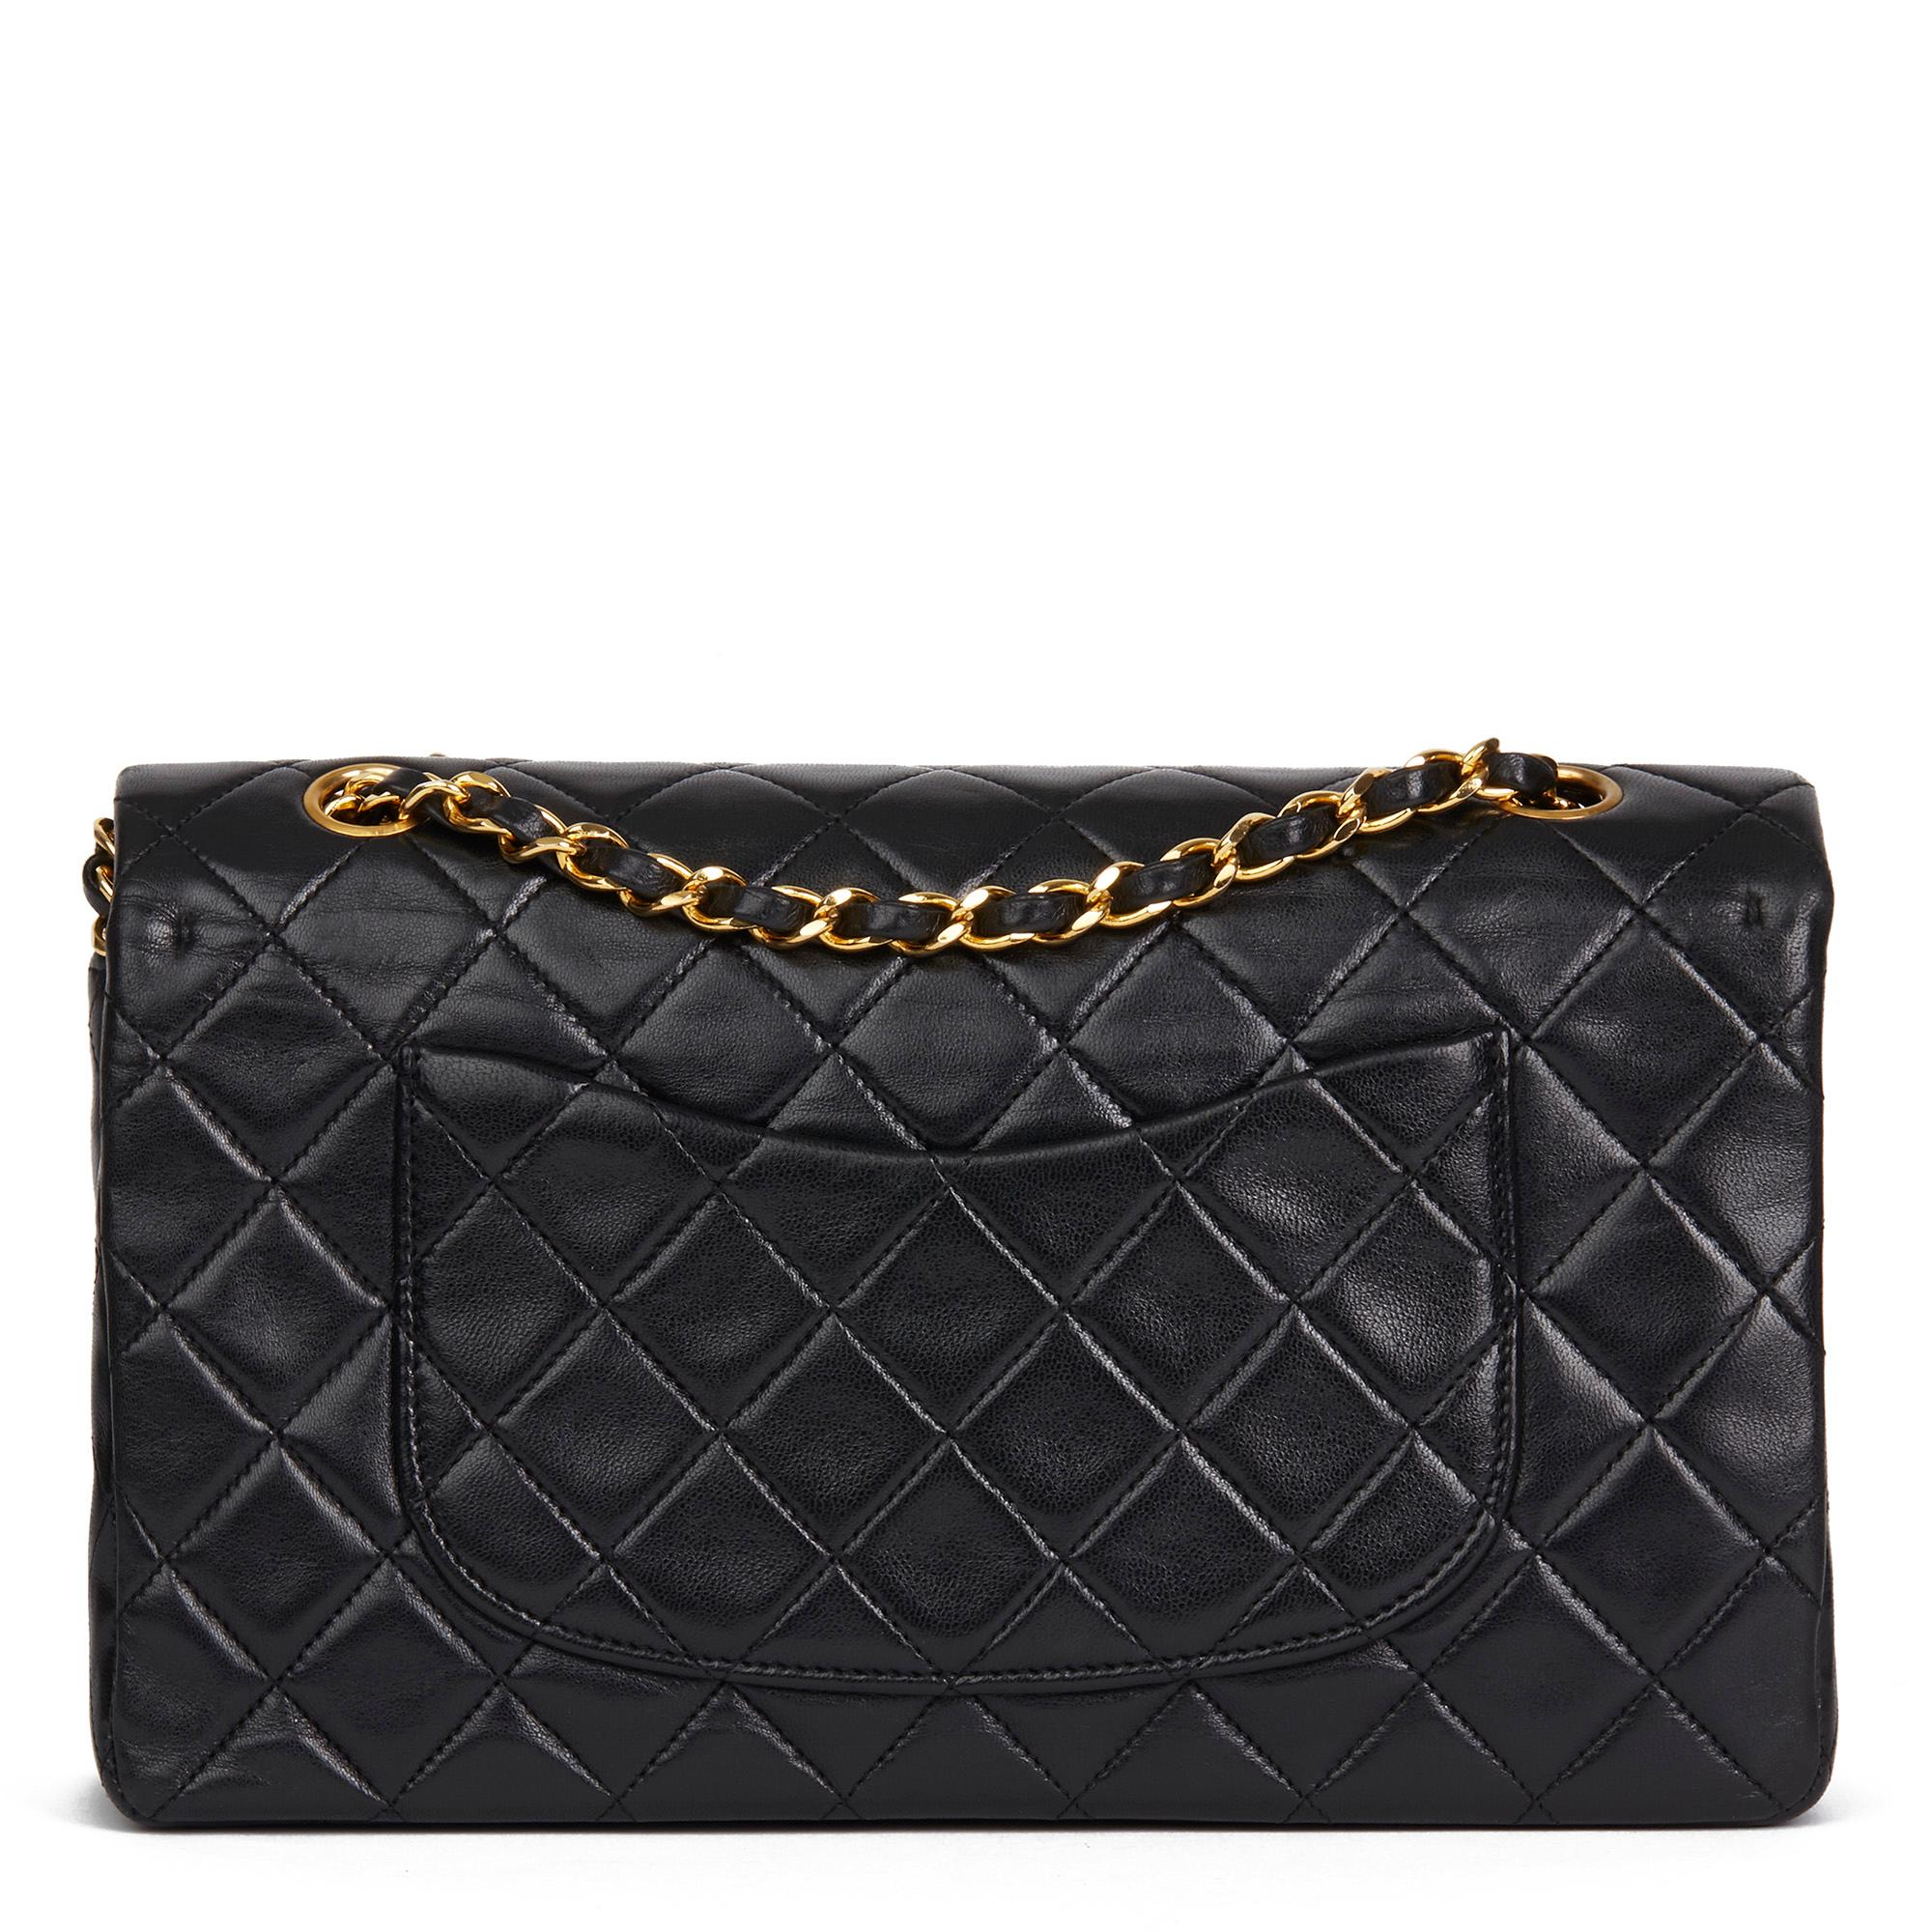 1990 Chanel Black Quilted Lambskin Vintage Medium Classic Double Flap Bag 8